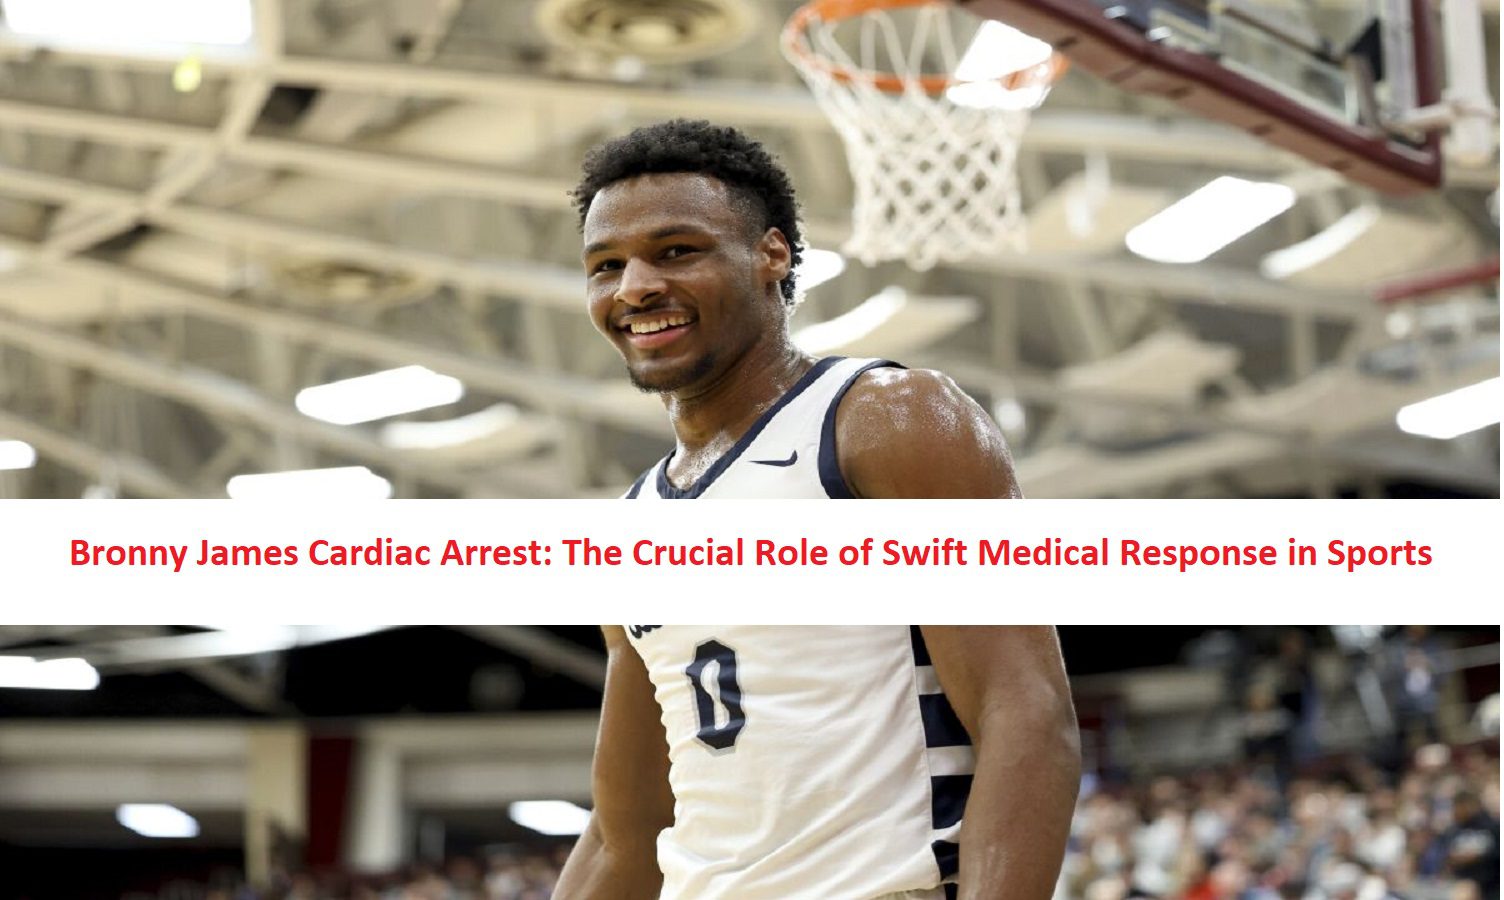 Bronny James Cardiac Arrest: The Crucial Role of Swift Medical Response in Sports